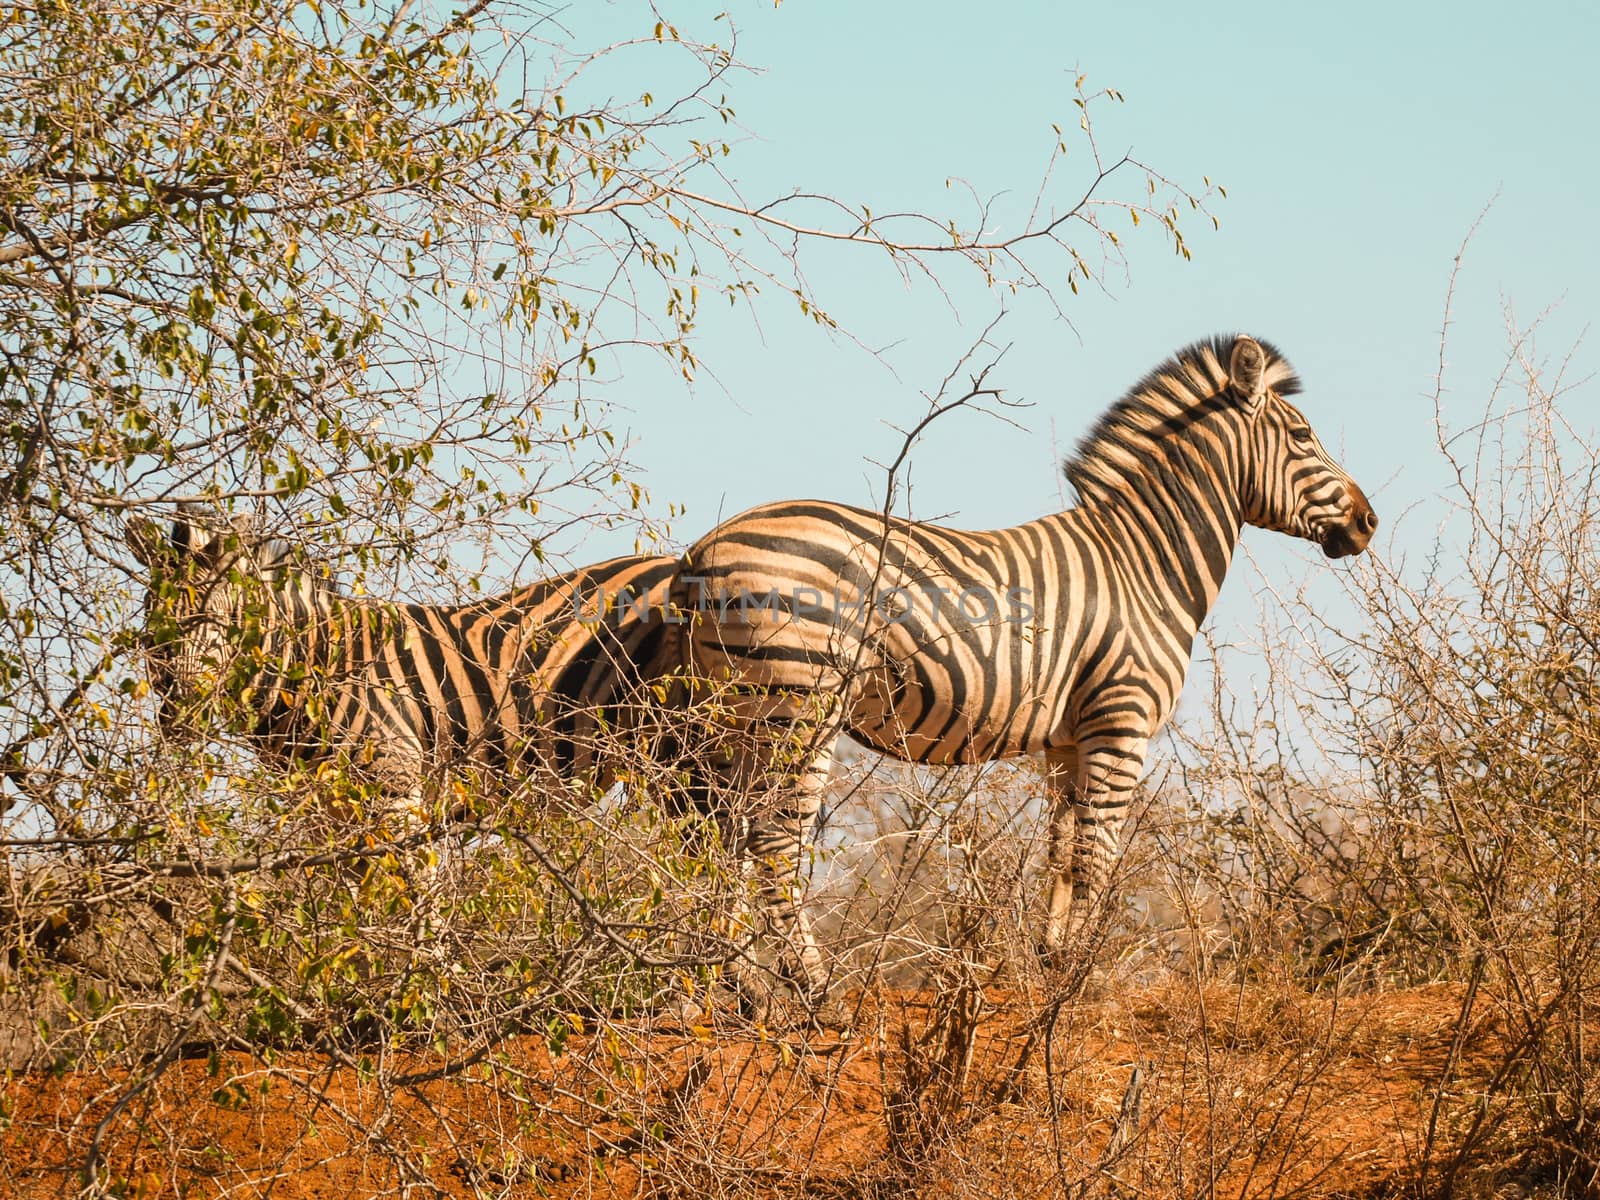 Two zebra standing back to back in sparce African bush their str by brians101